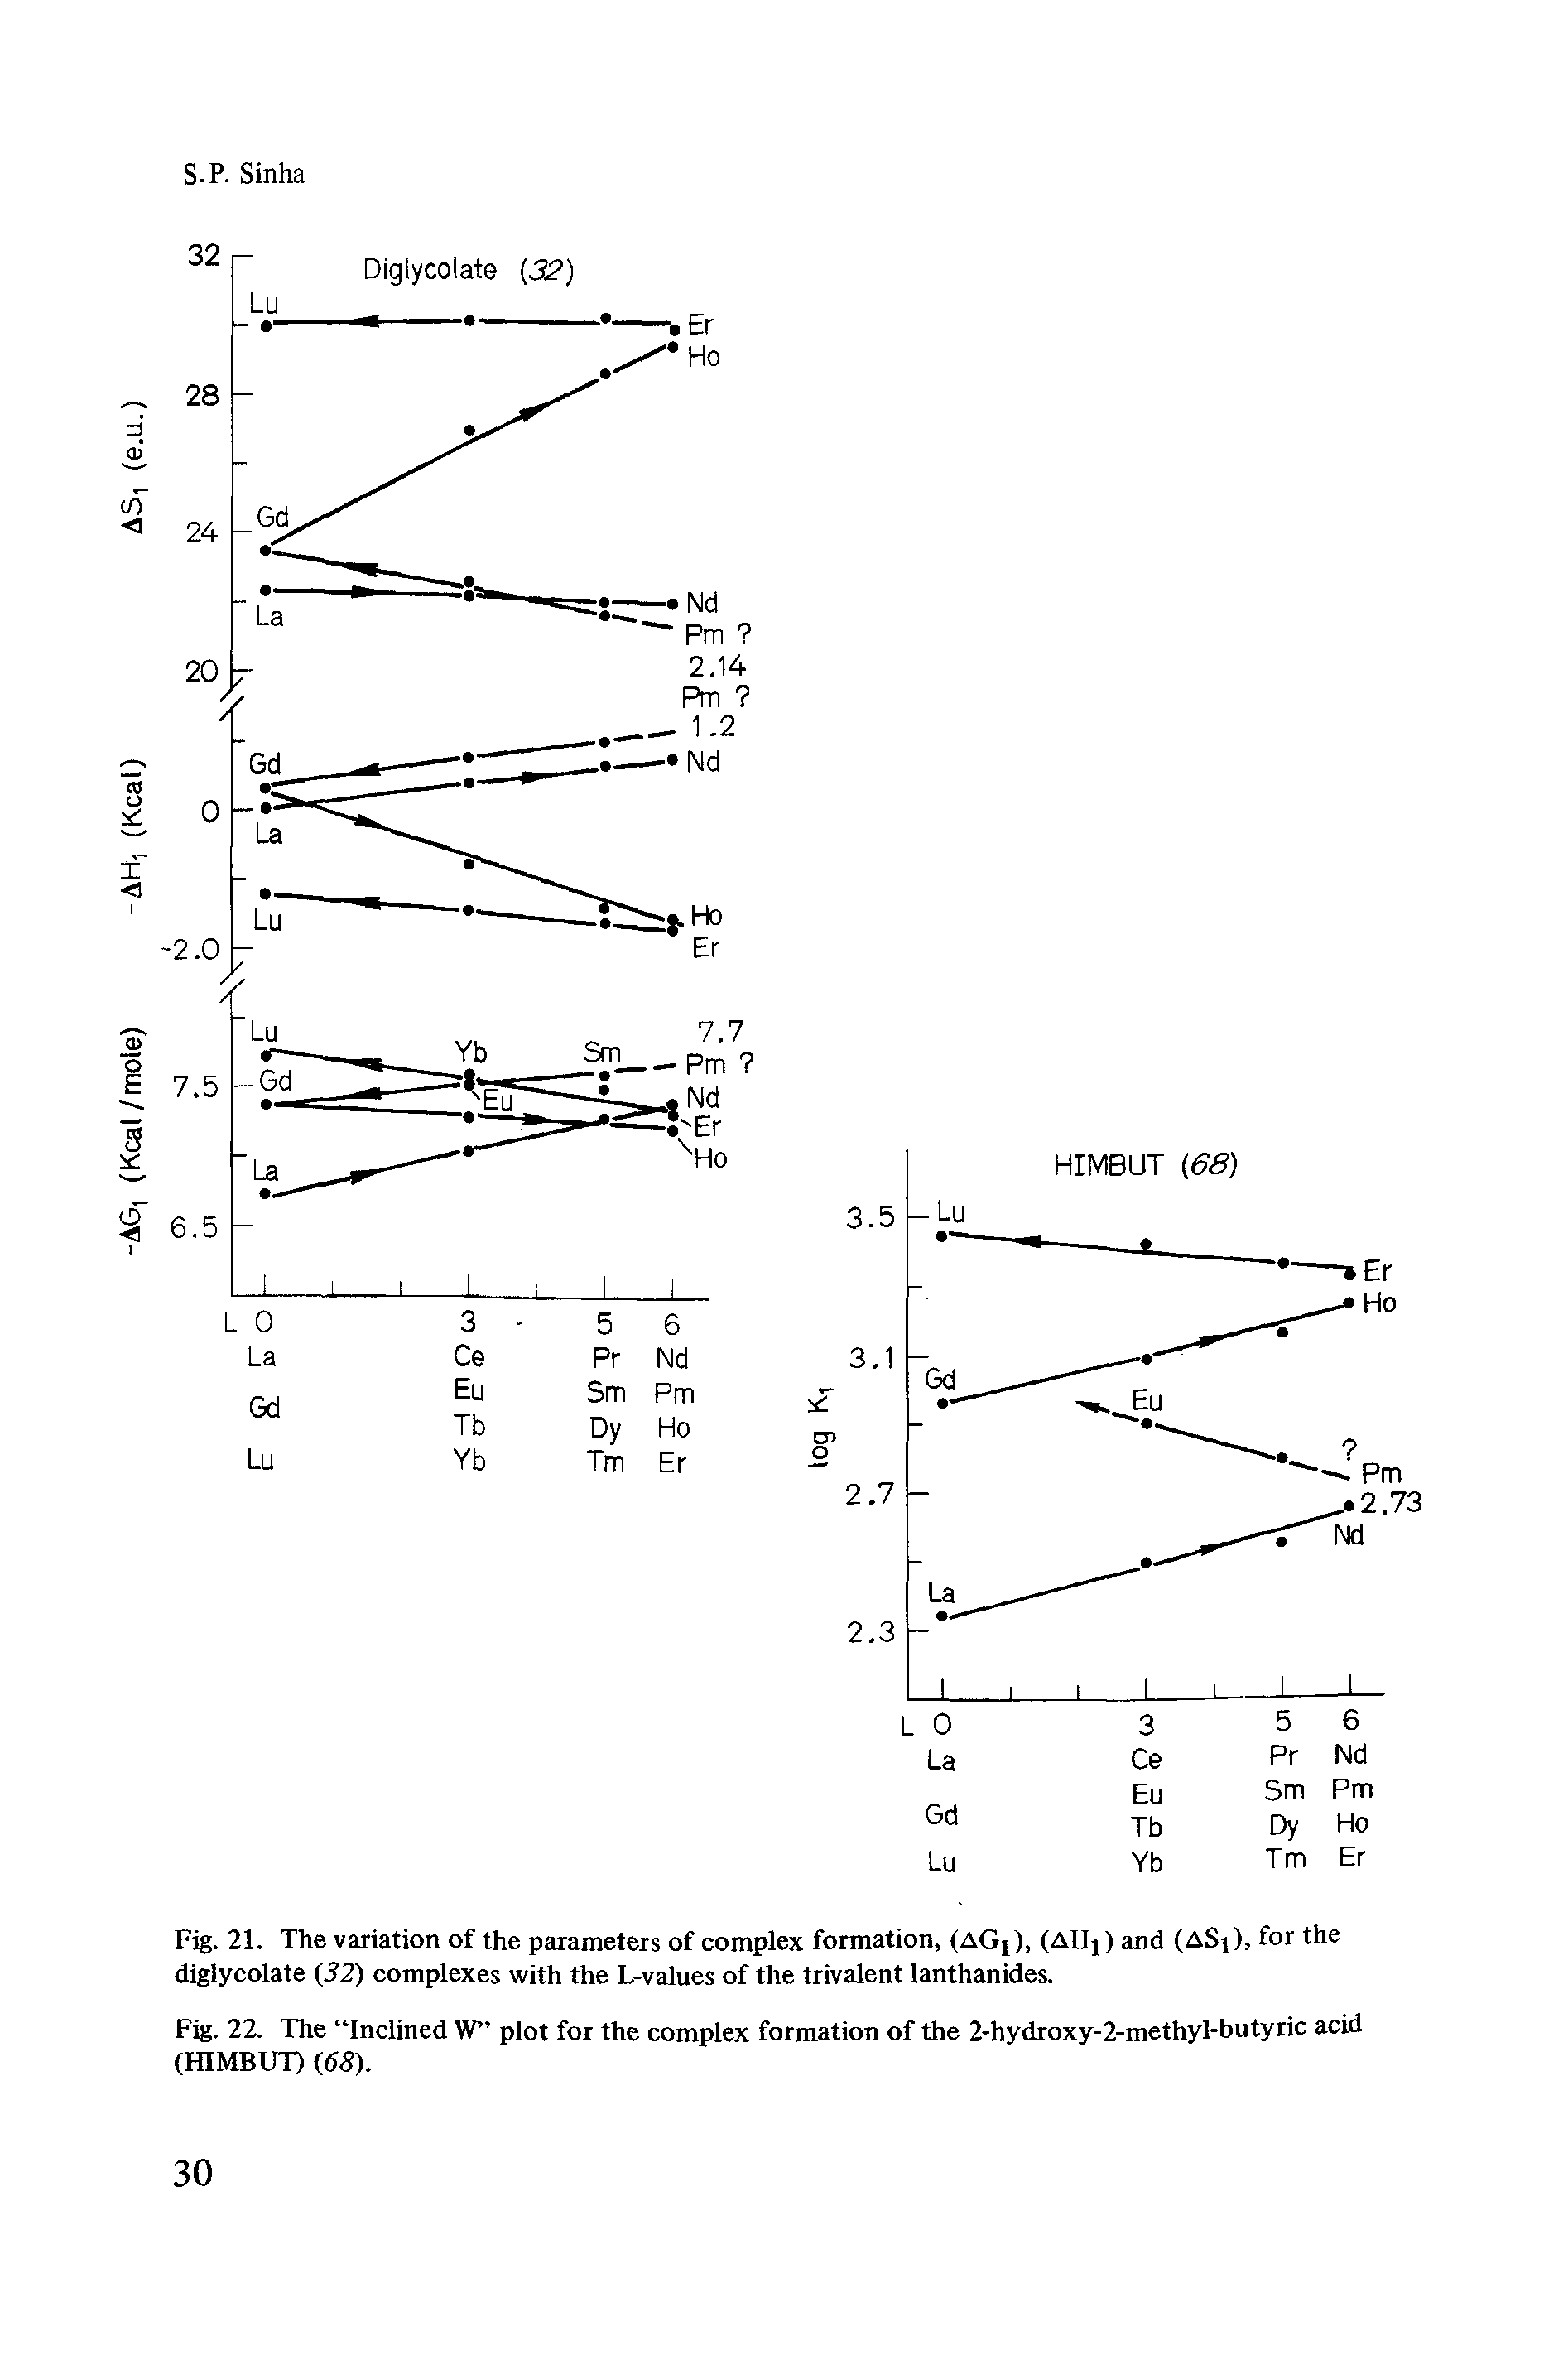 Fig. 21. The variation of the parameters of complex formation, (AG ), (AHx) and (ASi), for the diglycolate (32) complexes with the L-values of the trivalent lanthanides.